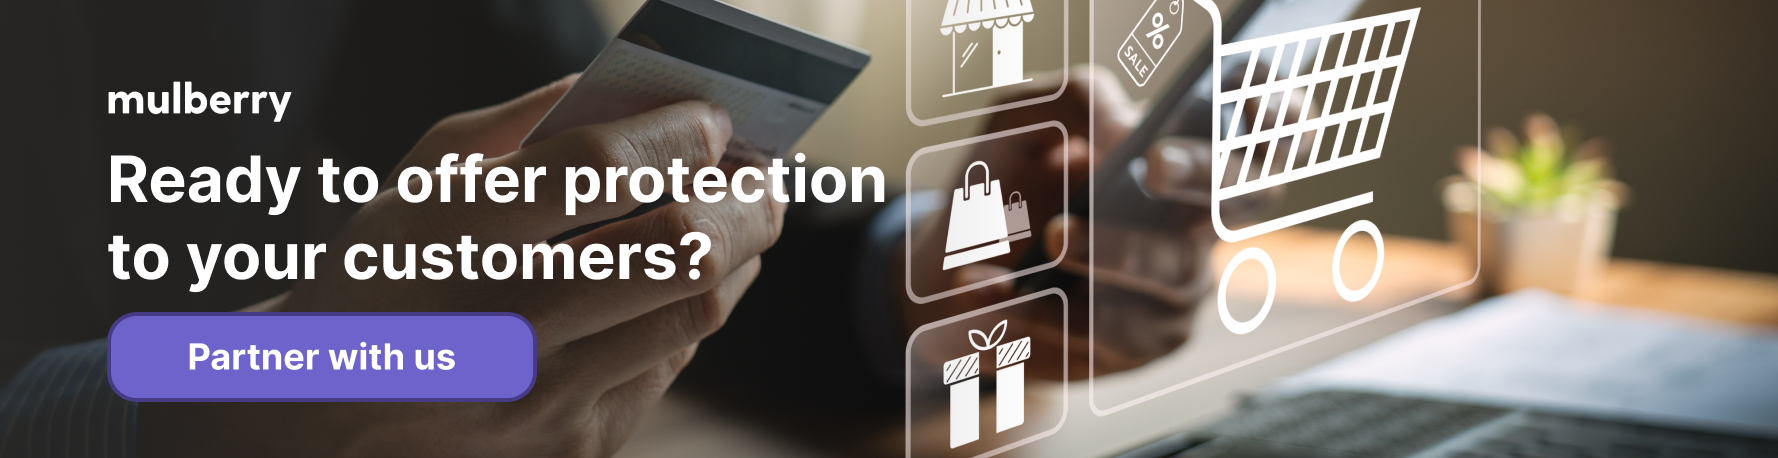 Ready to offer protection to your customers? Partner with Mulberry